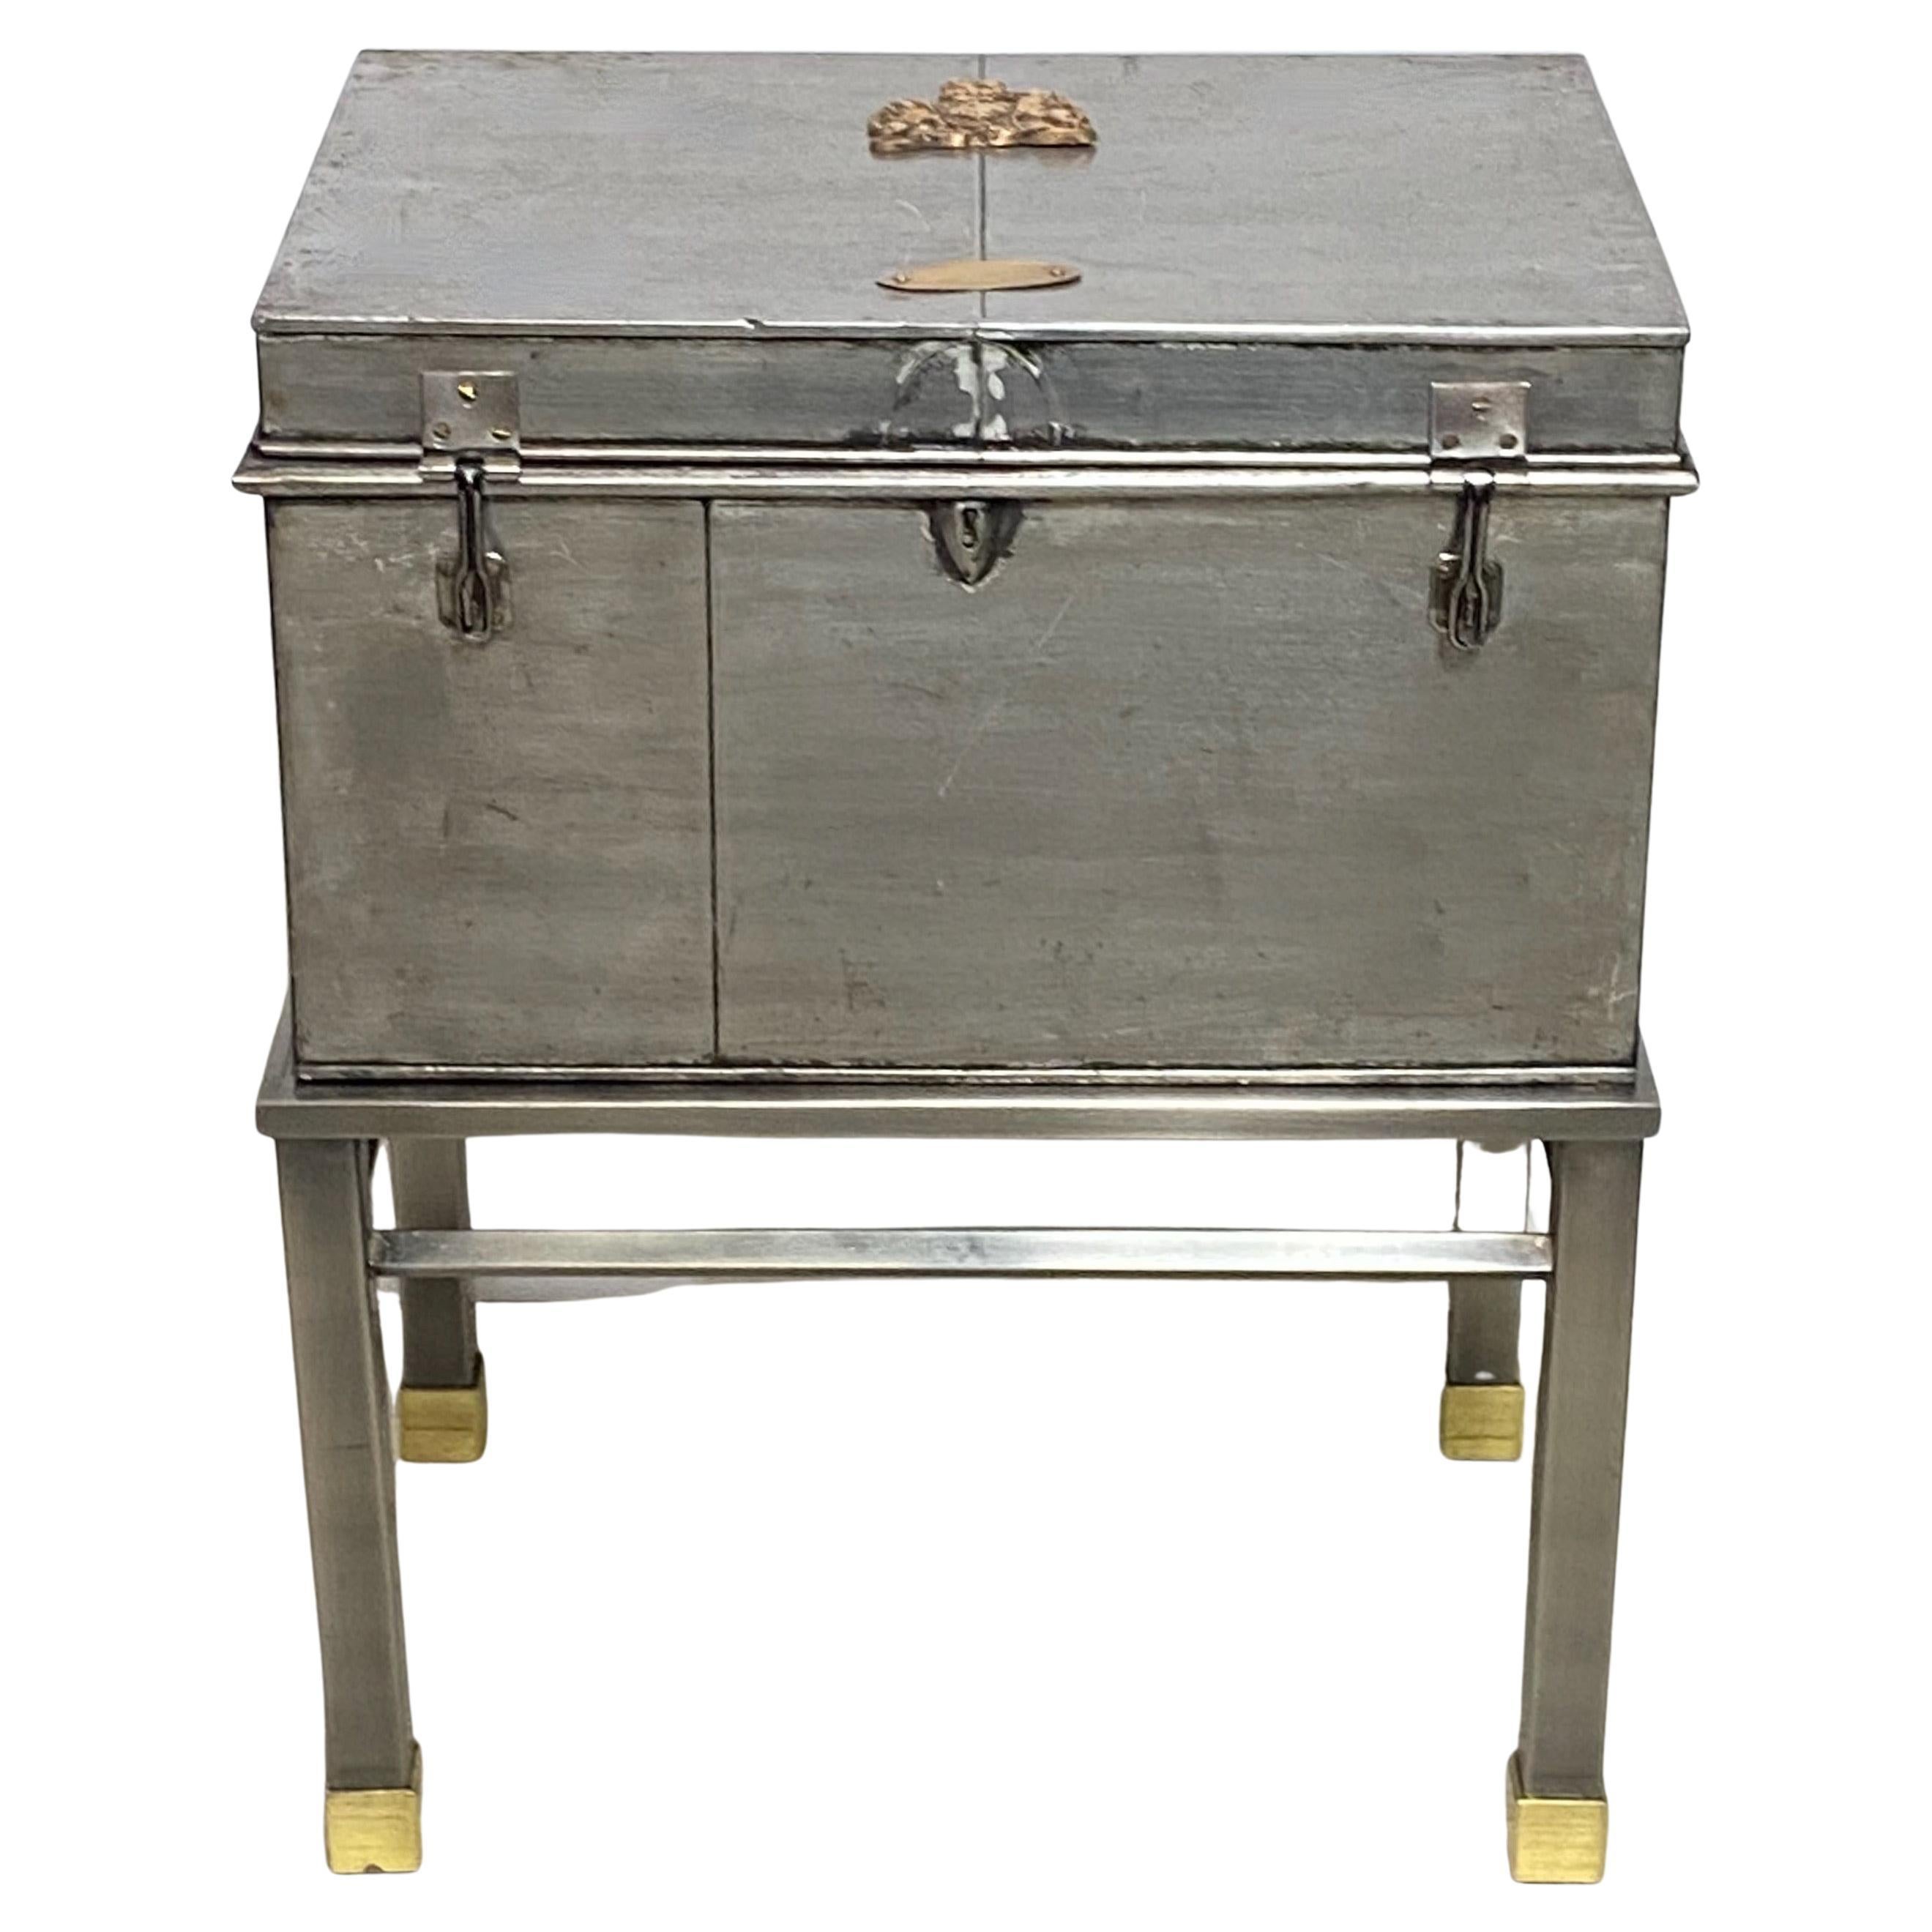 Burnished Steel and Brass Box on Stand, England 19th Century